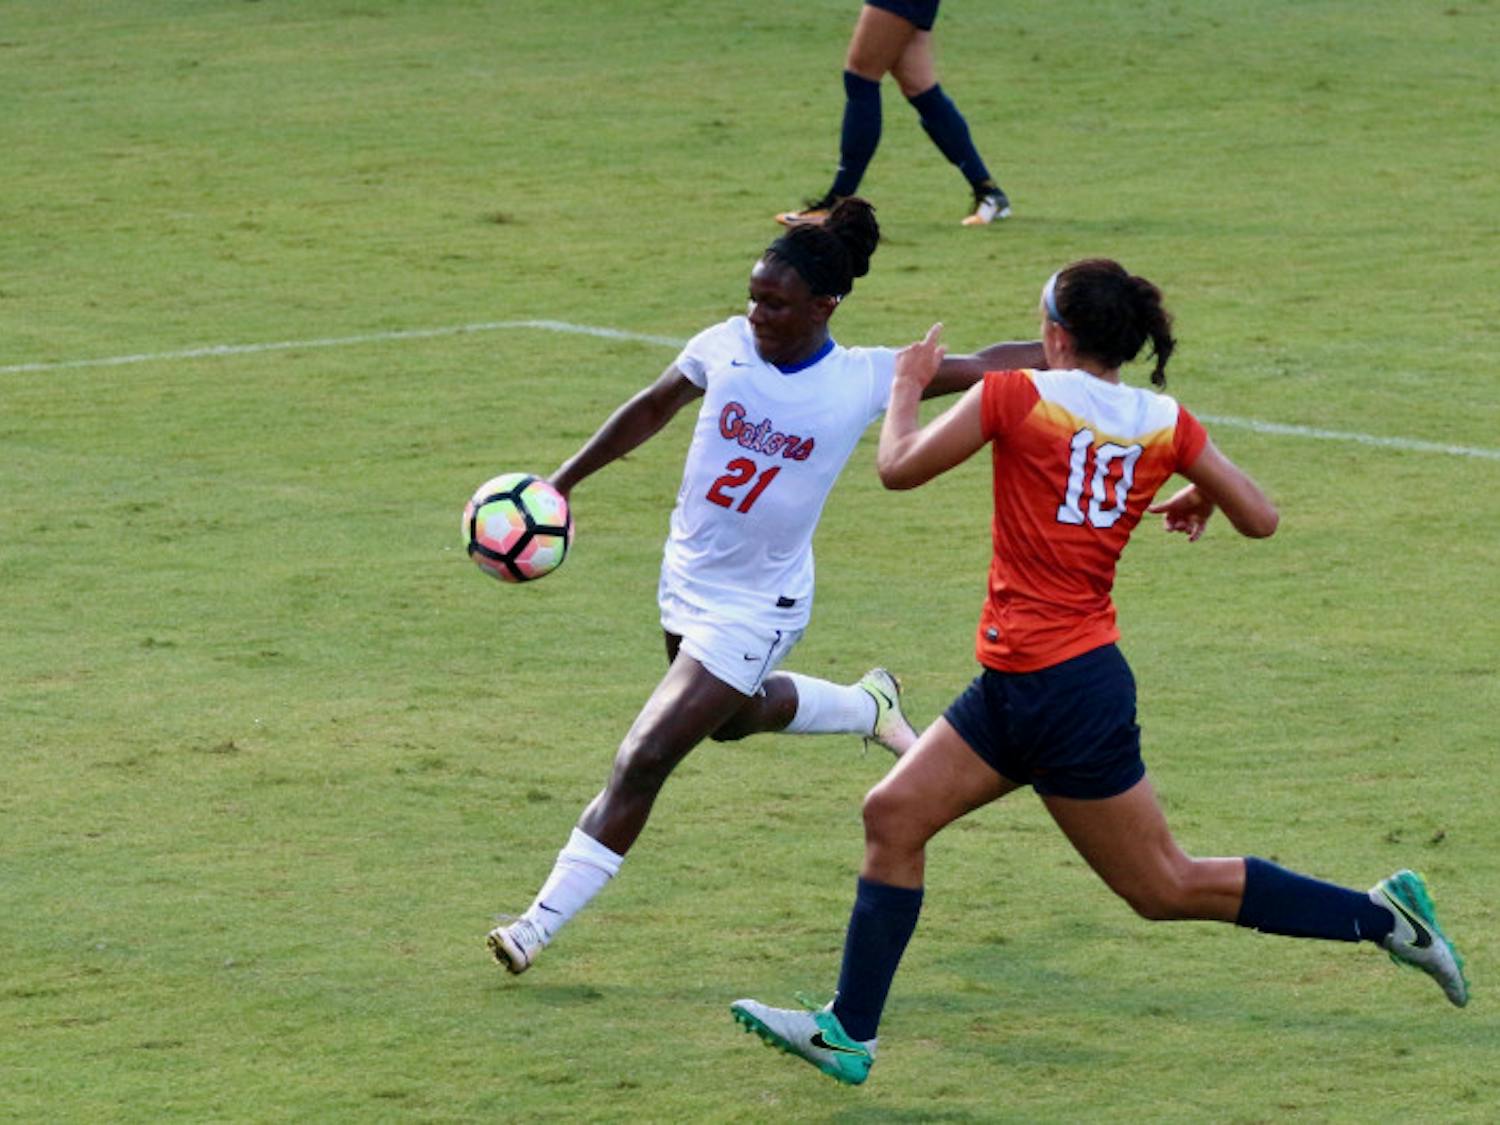 UF forward Deanne Rose collects the ball during Florida's 2-1 win against Syracuse on Aug. 27 at Donald R. Dizney Stadium.